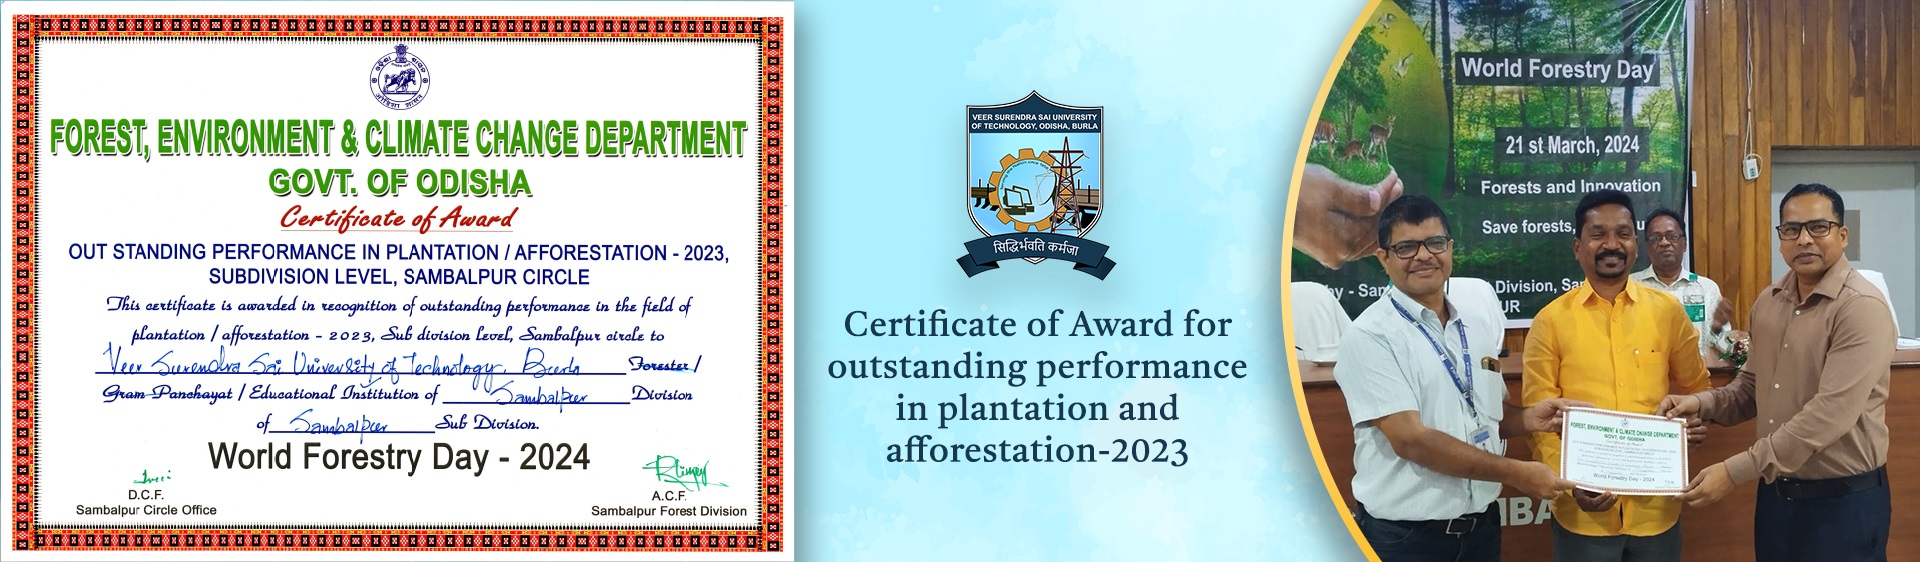 Certificate of Award for outstanding performance in plantation and afforestation-2023